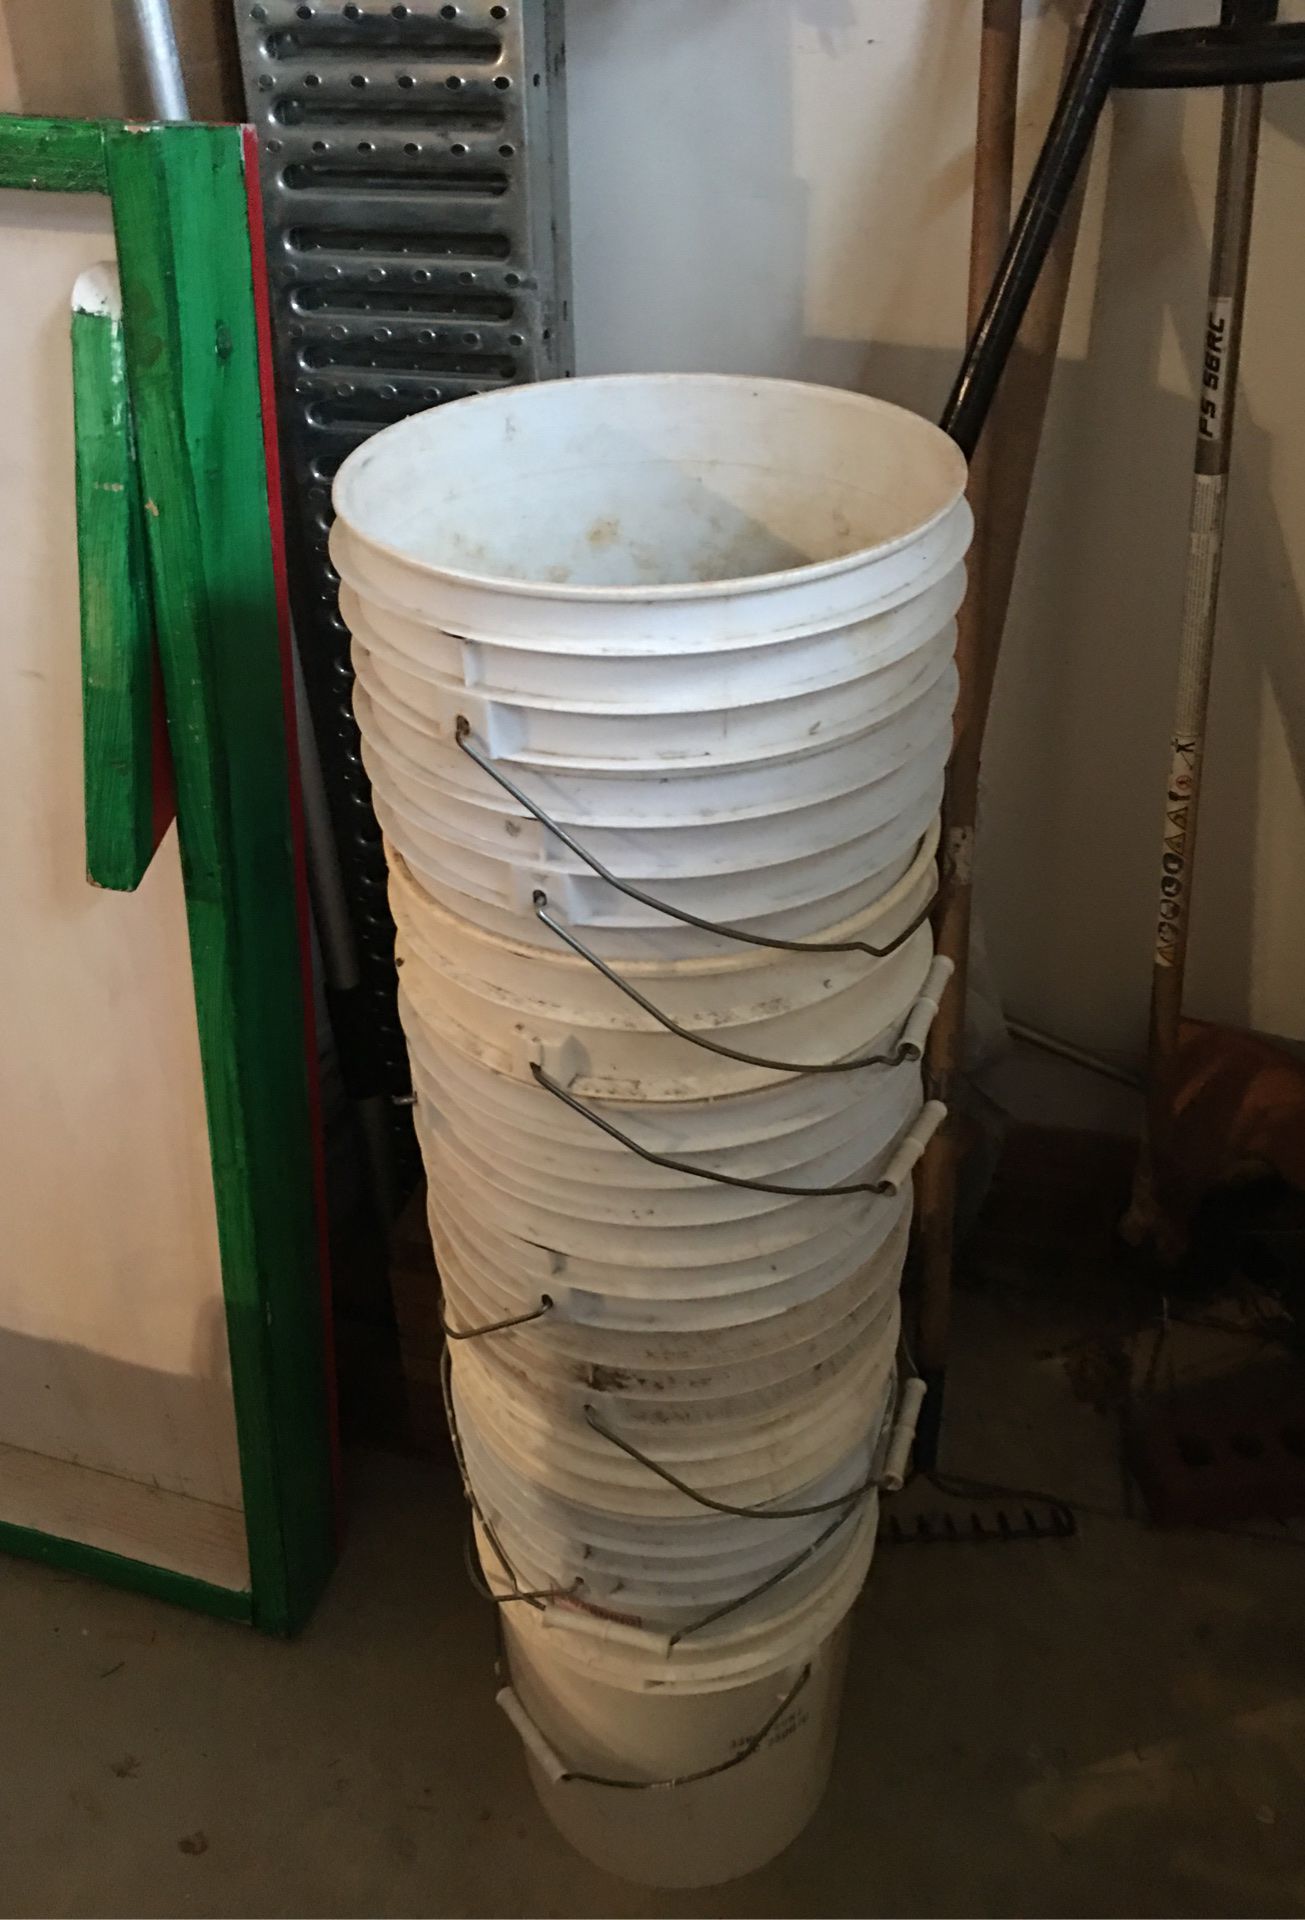 Heavy buckets to carry dirt, tools , etc 9 of them